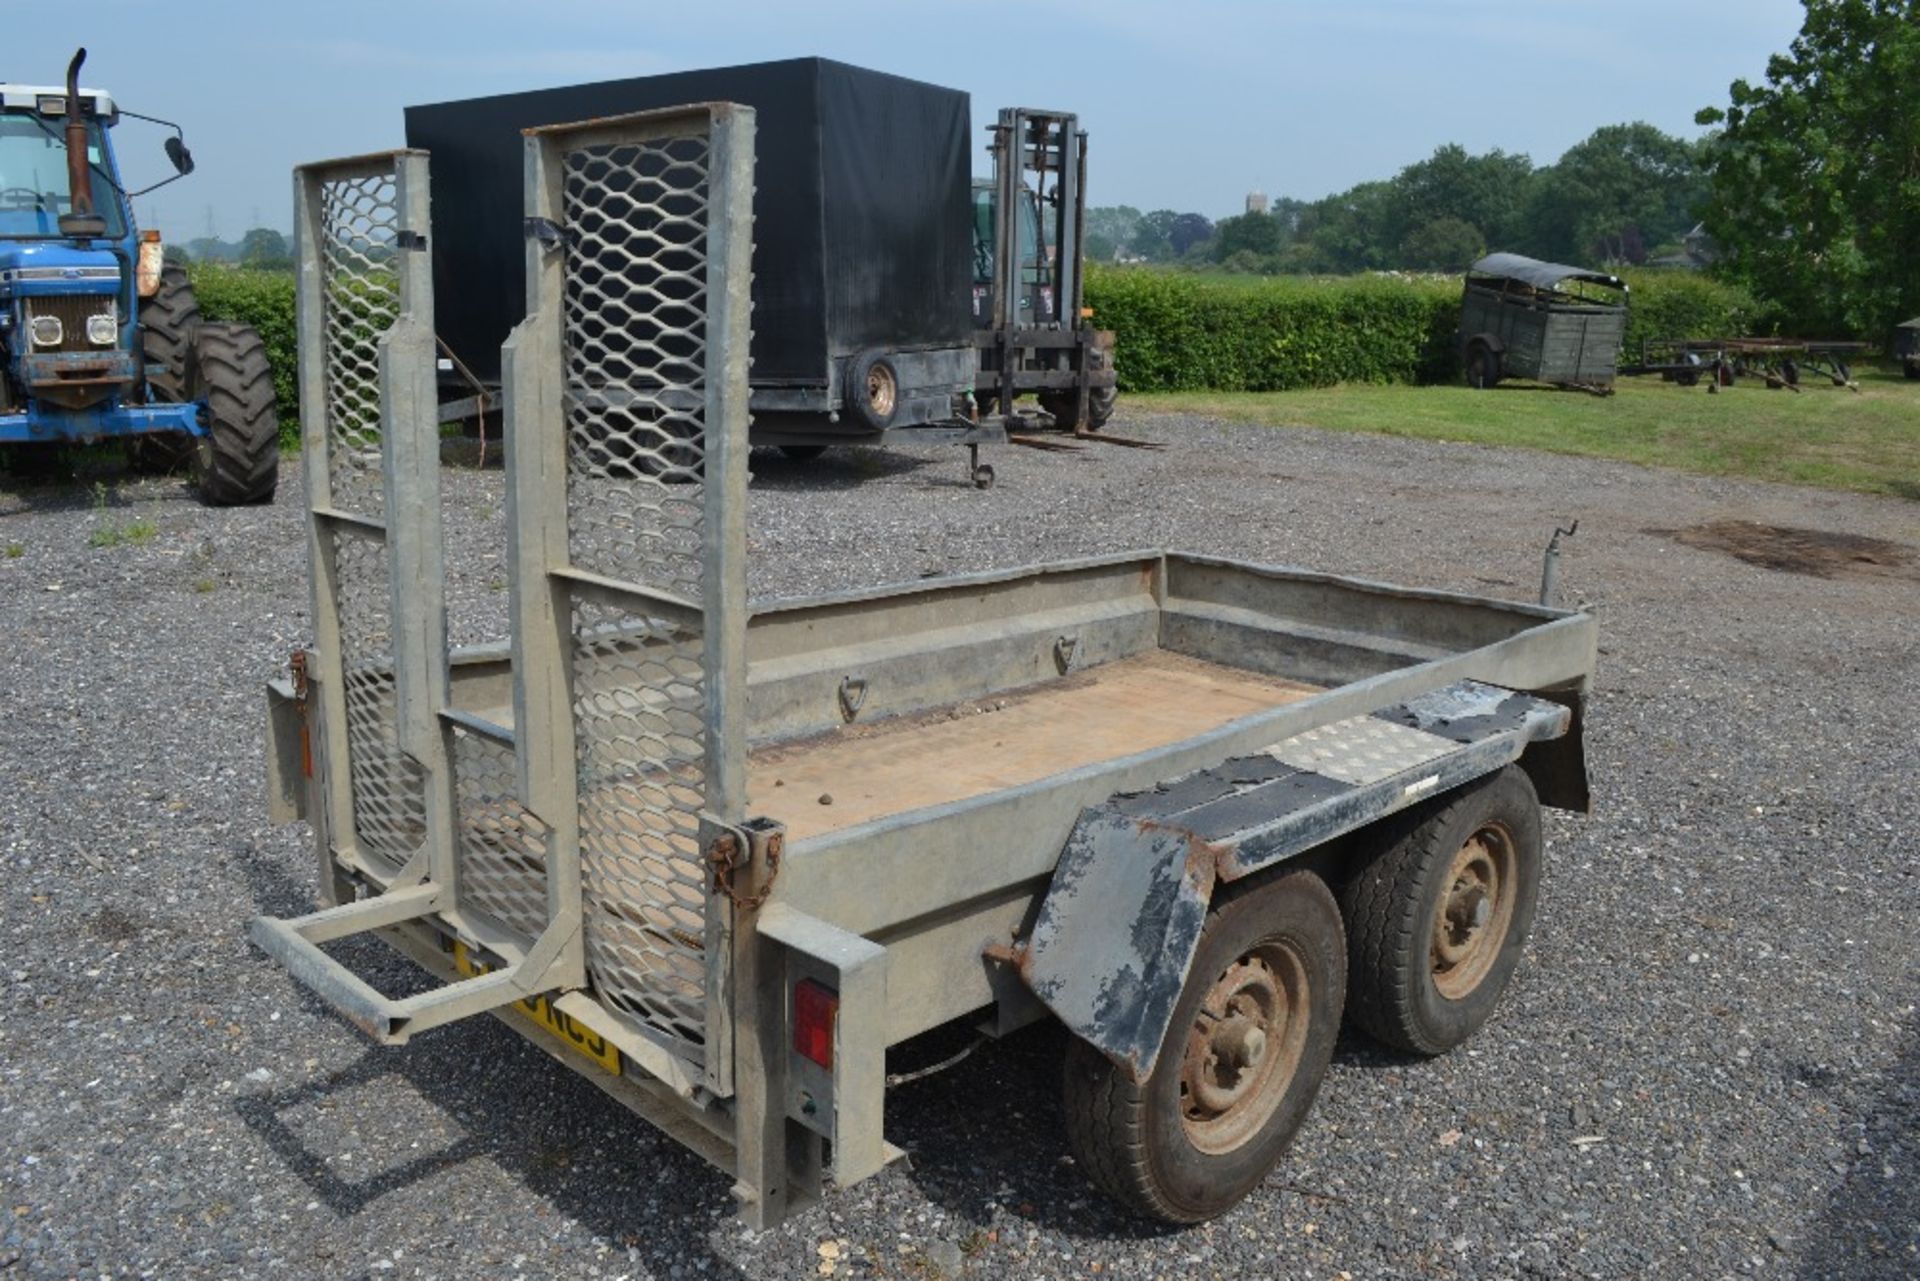 Indespension 8ft x 4ft twin axle plant trailer. Model SDHG20840 SCOT8. Serial number 088116. With - Image 4 of 5